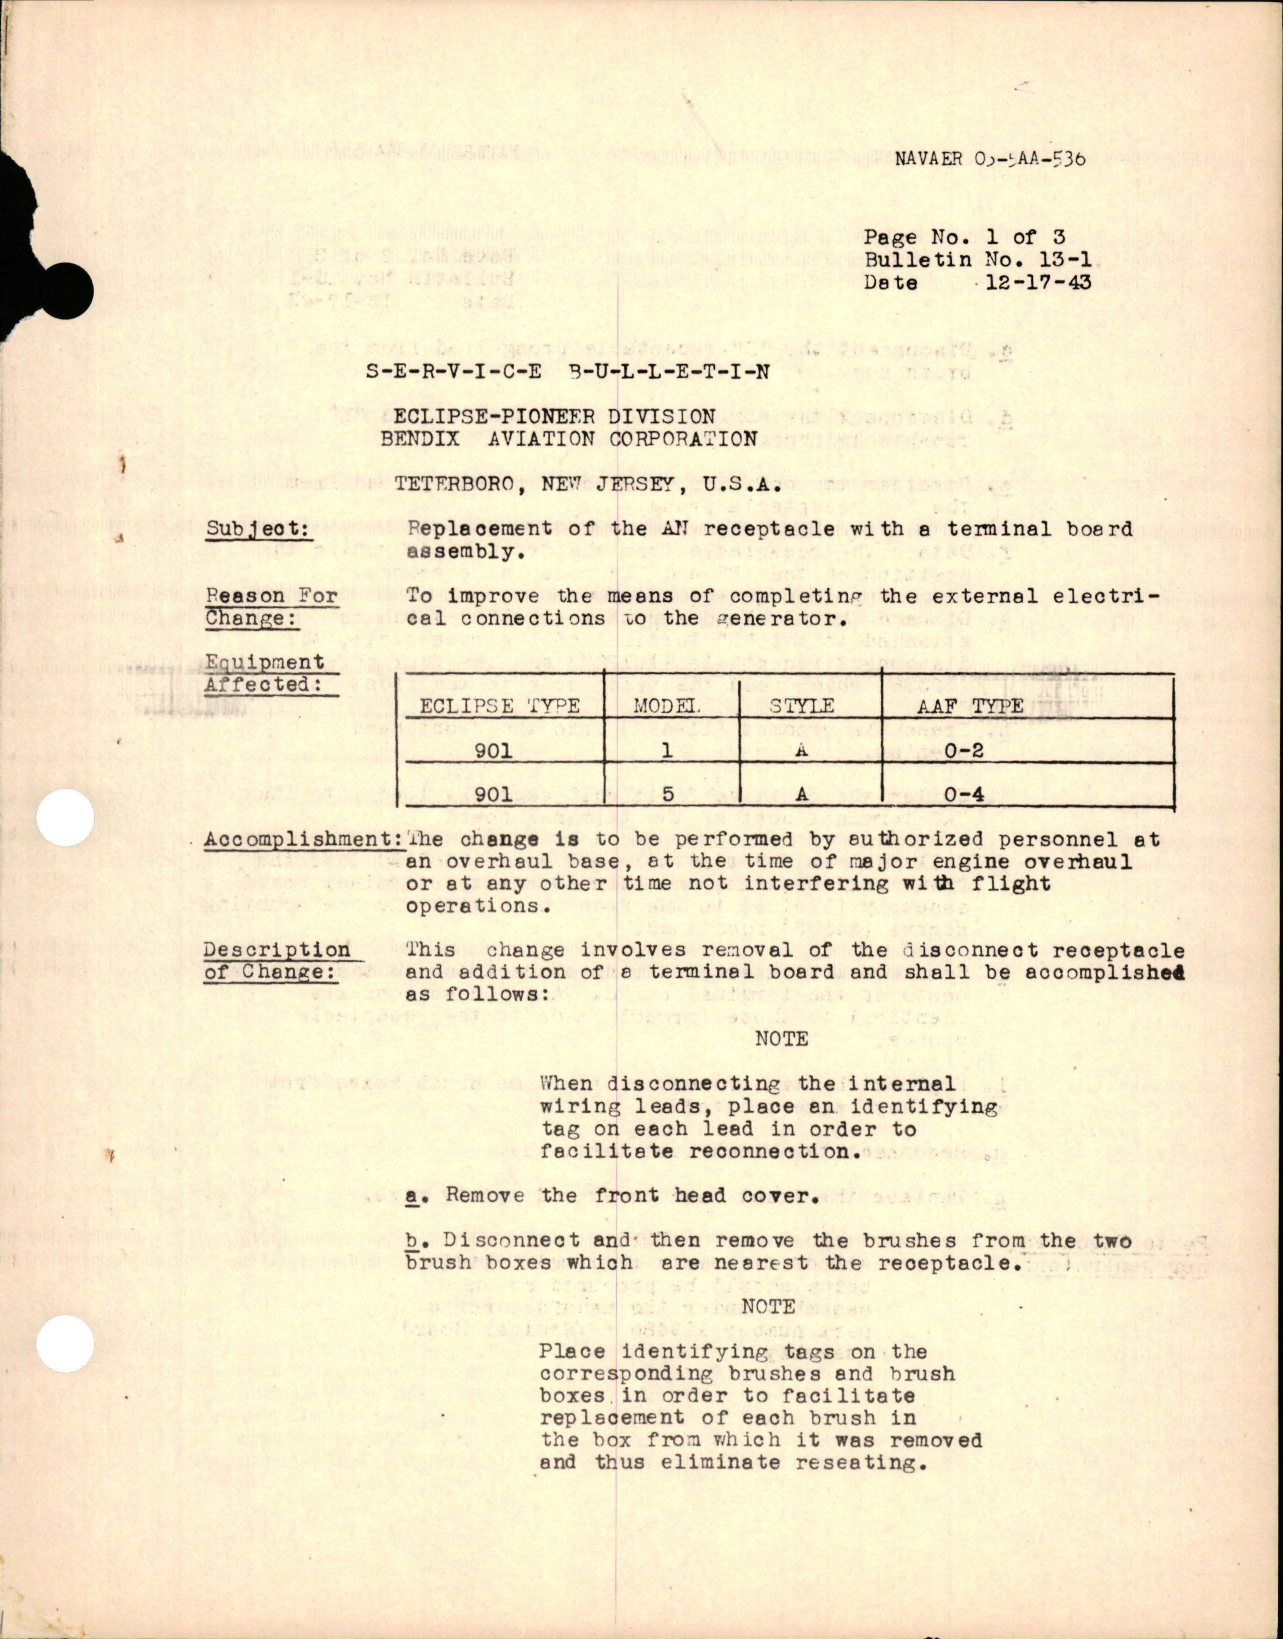 Sample page 1 from AirCorps Library document: Replacement of the AN Receptacle with a Terminal Board Assembly